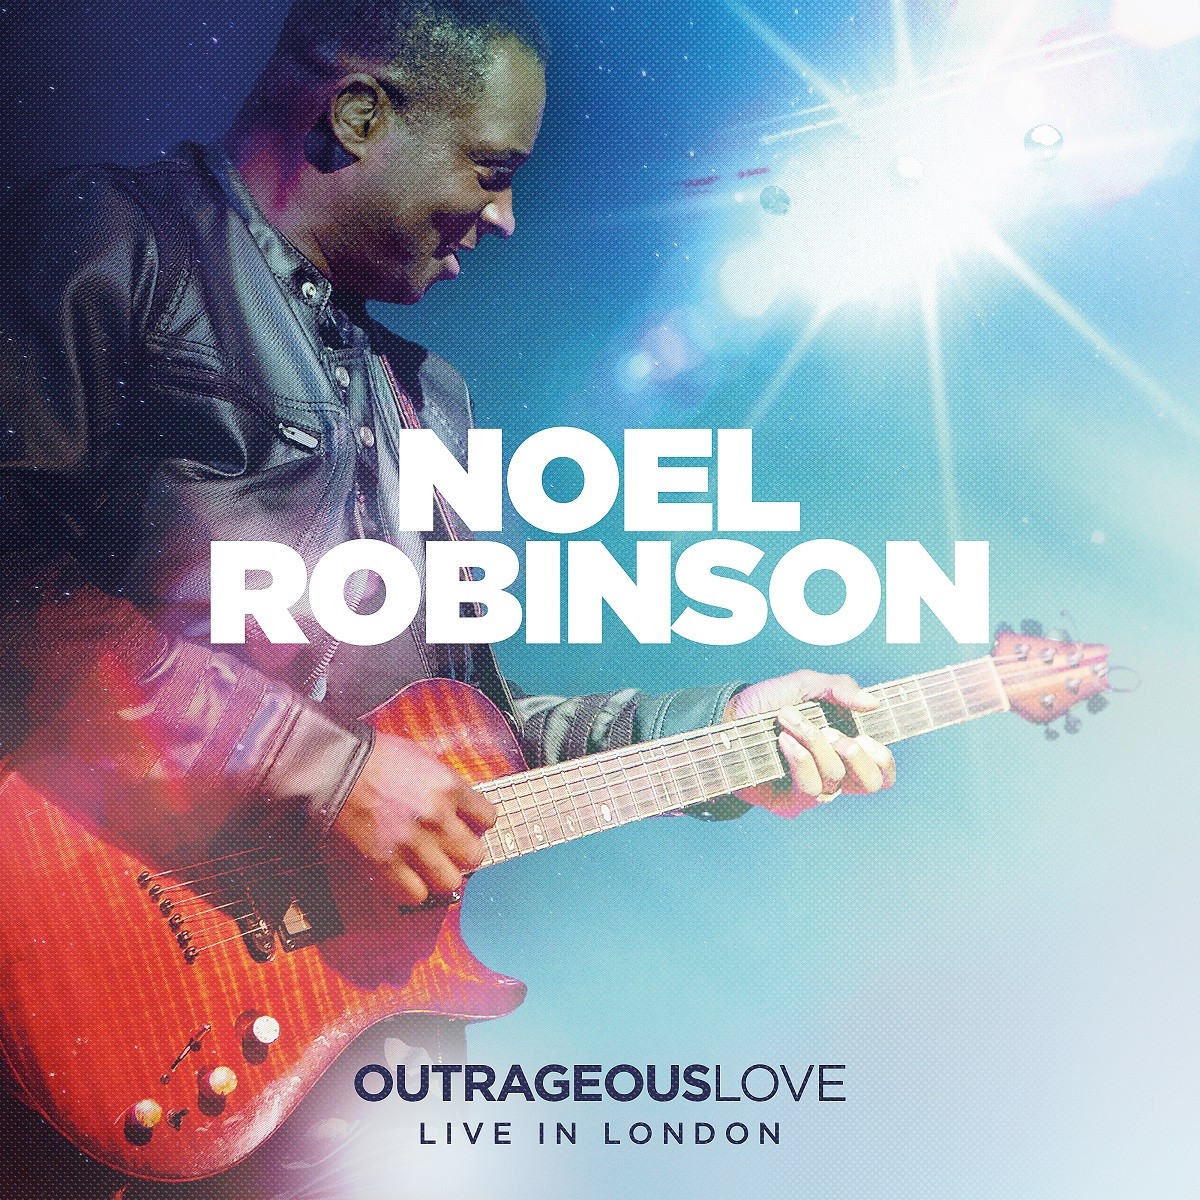 Noel Robinson - Outrageous Love